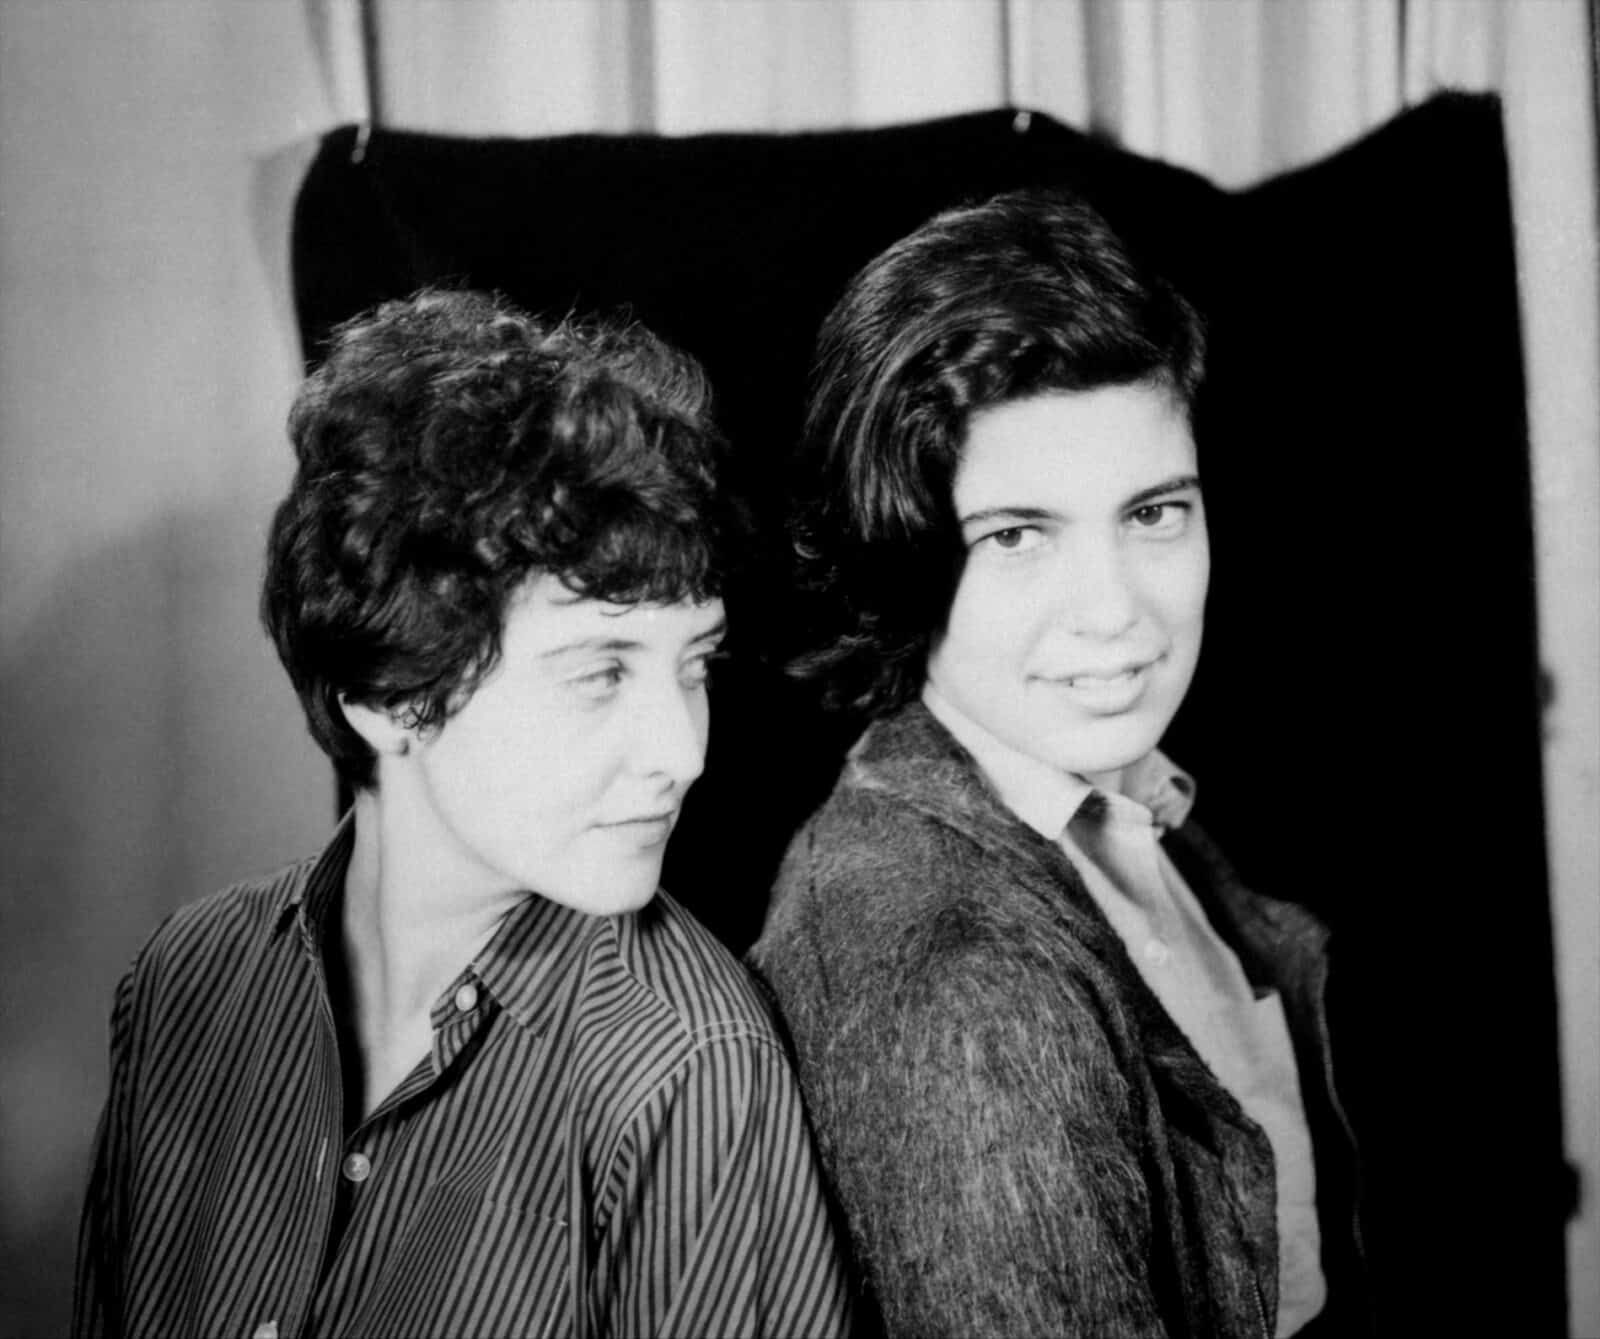 Acclaimed playwright Maria Irene Fornés and writer Susan Sontag sit together in New York City in a black and white photograph from the 1960s. Photo courtesy of Robert Steed and The Rest I Make Up